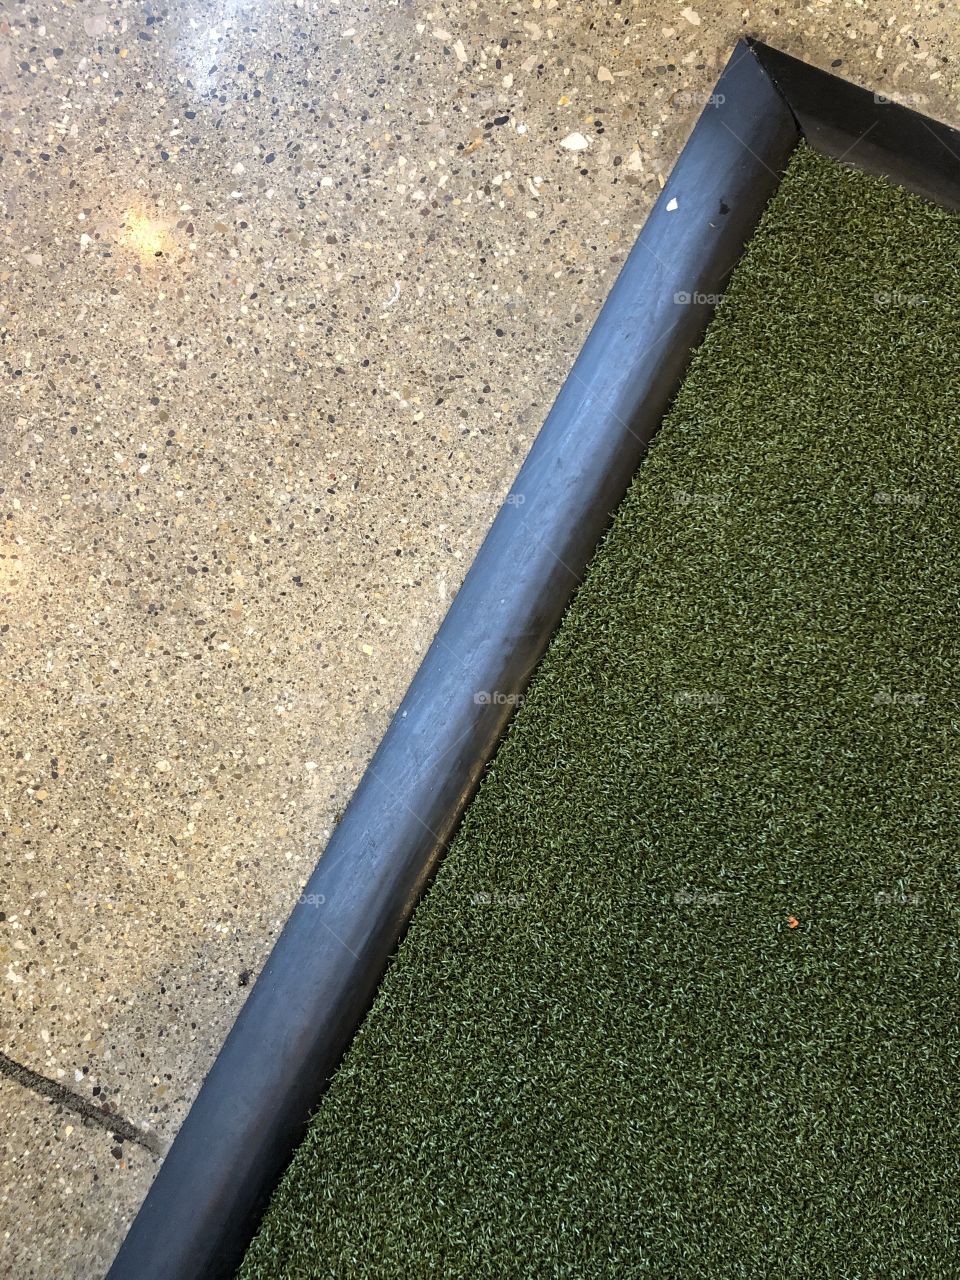 Fake grass and polished concrete